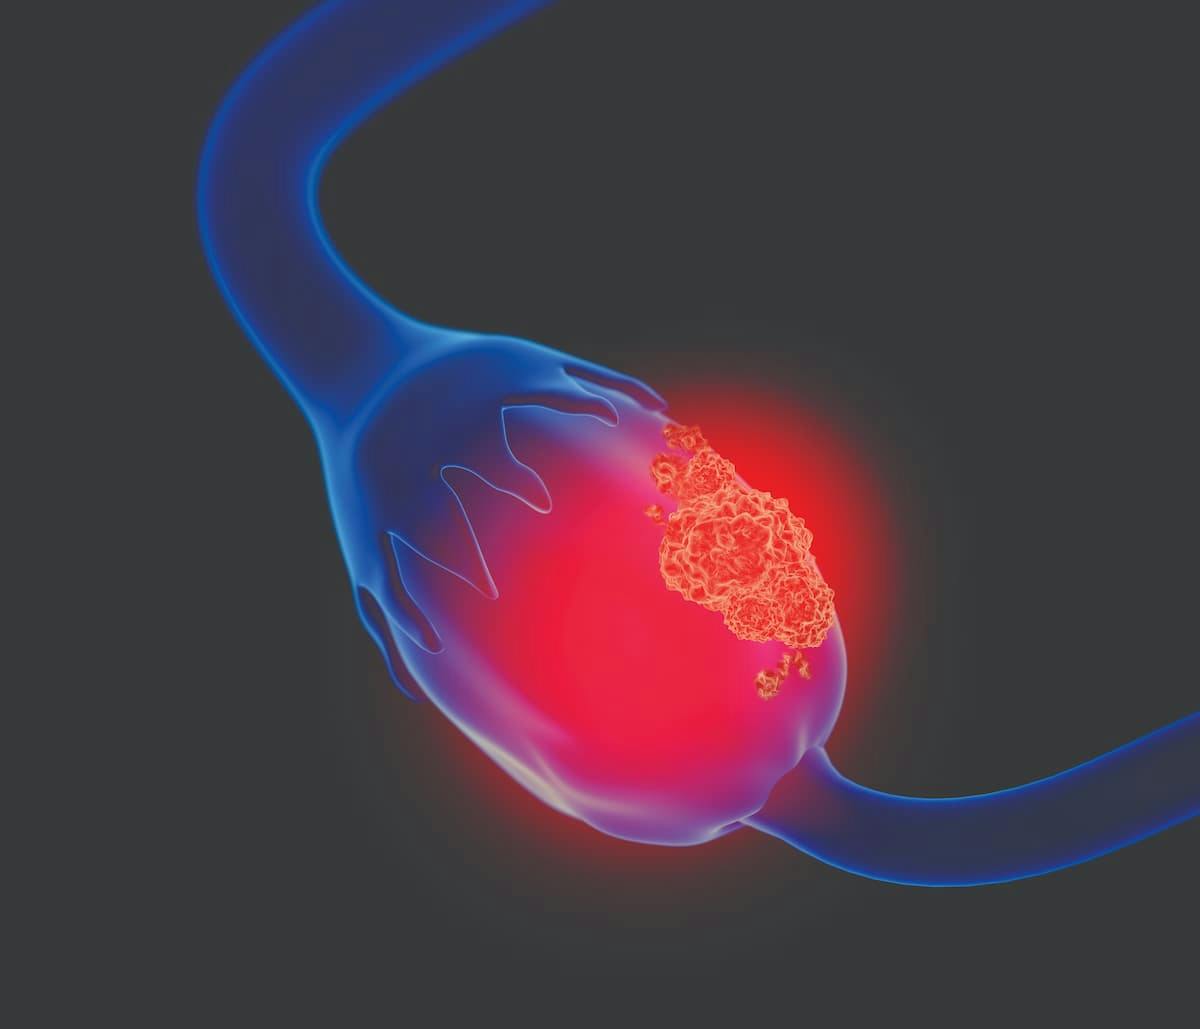 The VENTANA FOLR1 RxDx Assay has received approval from the FDA for identifying epithelial ovarian cancer in patients who may be eligible for treatment with mirvetuximab soravtansine-gynx.